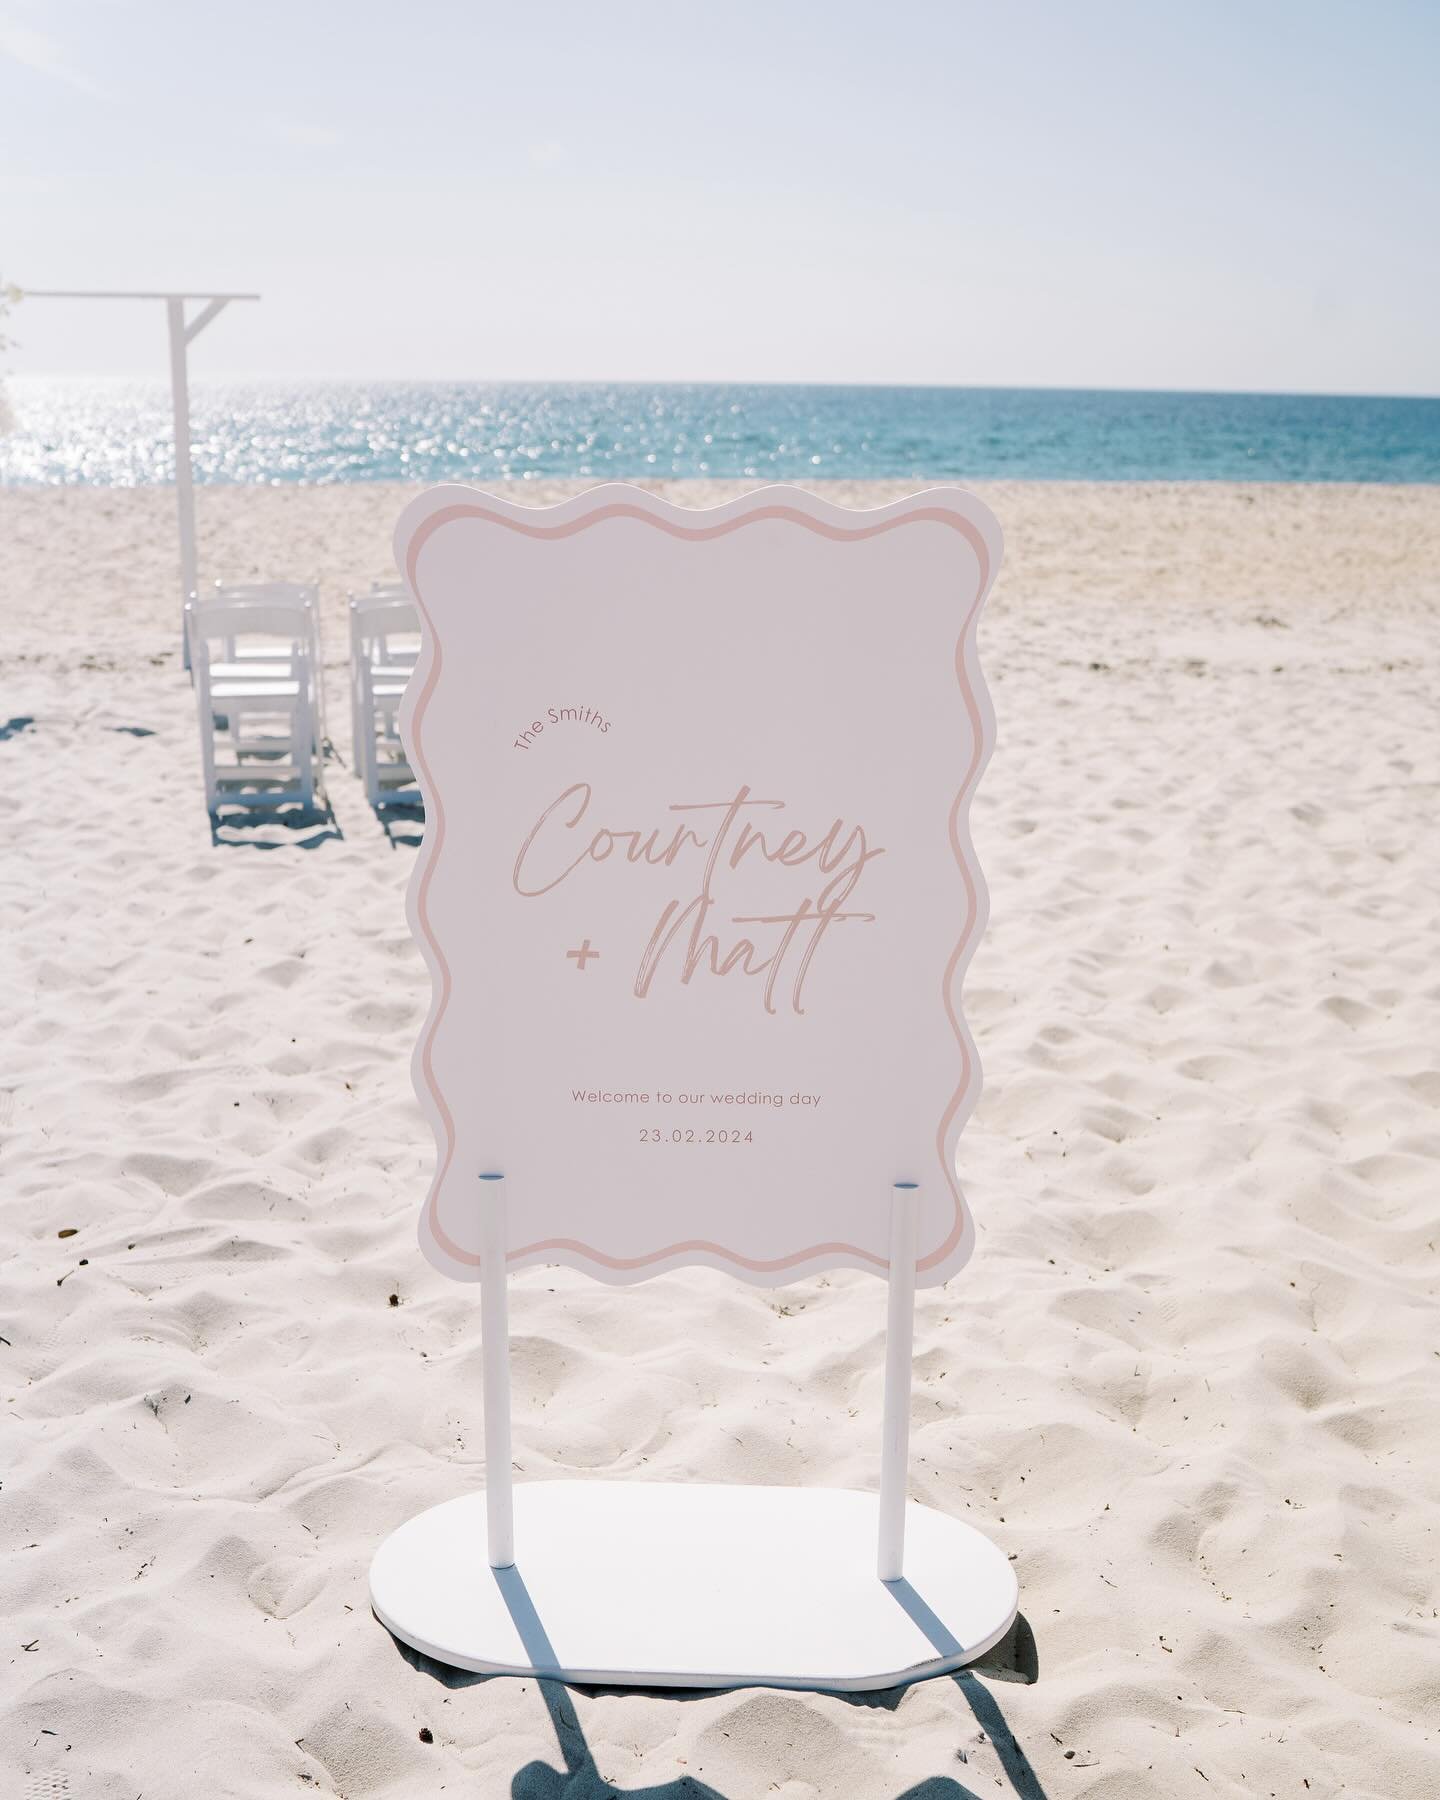 Signage for Courtney and Matt ✨ Love the view of the coast 🌊

Captured by: @ameliaclairephoto 
Florals: @bloomin_wild_ 
.
.
.

#perthweddingstationery #perthwedding #perthweddingstylist #perthweddingstyling #perthweddingsandevents #perthdecor #perth